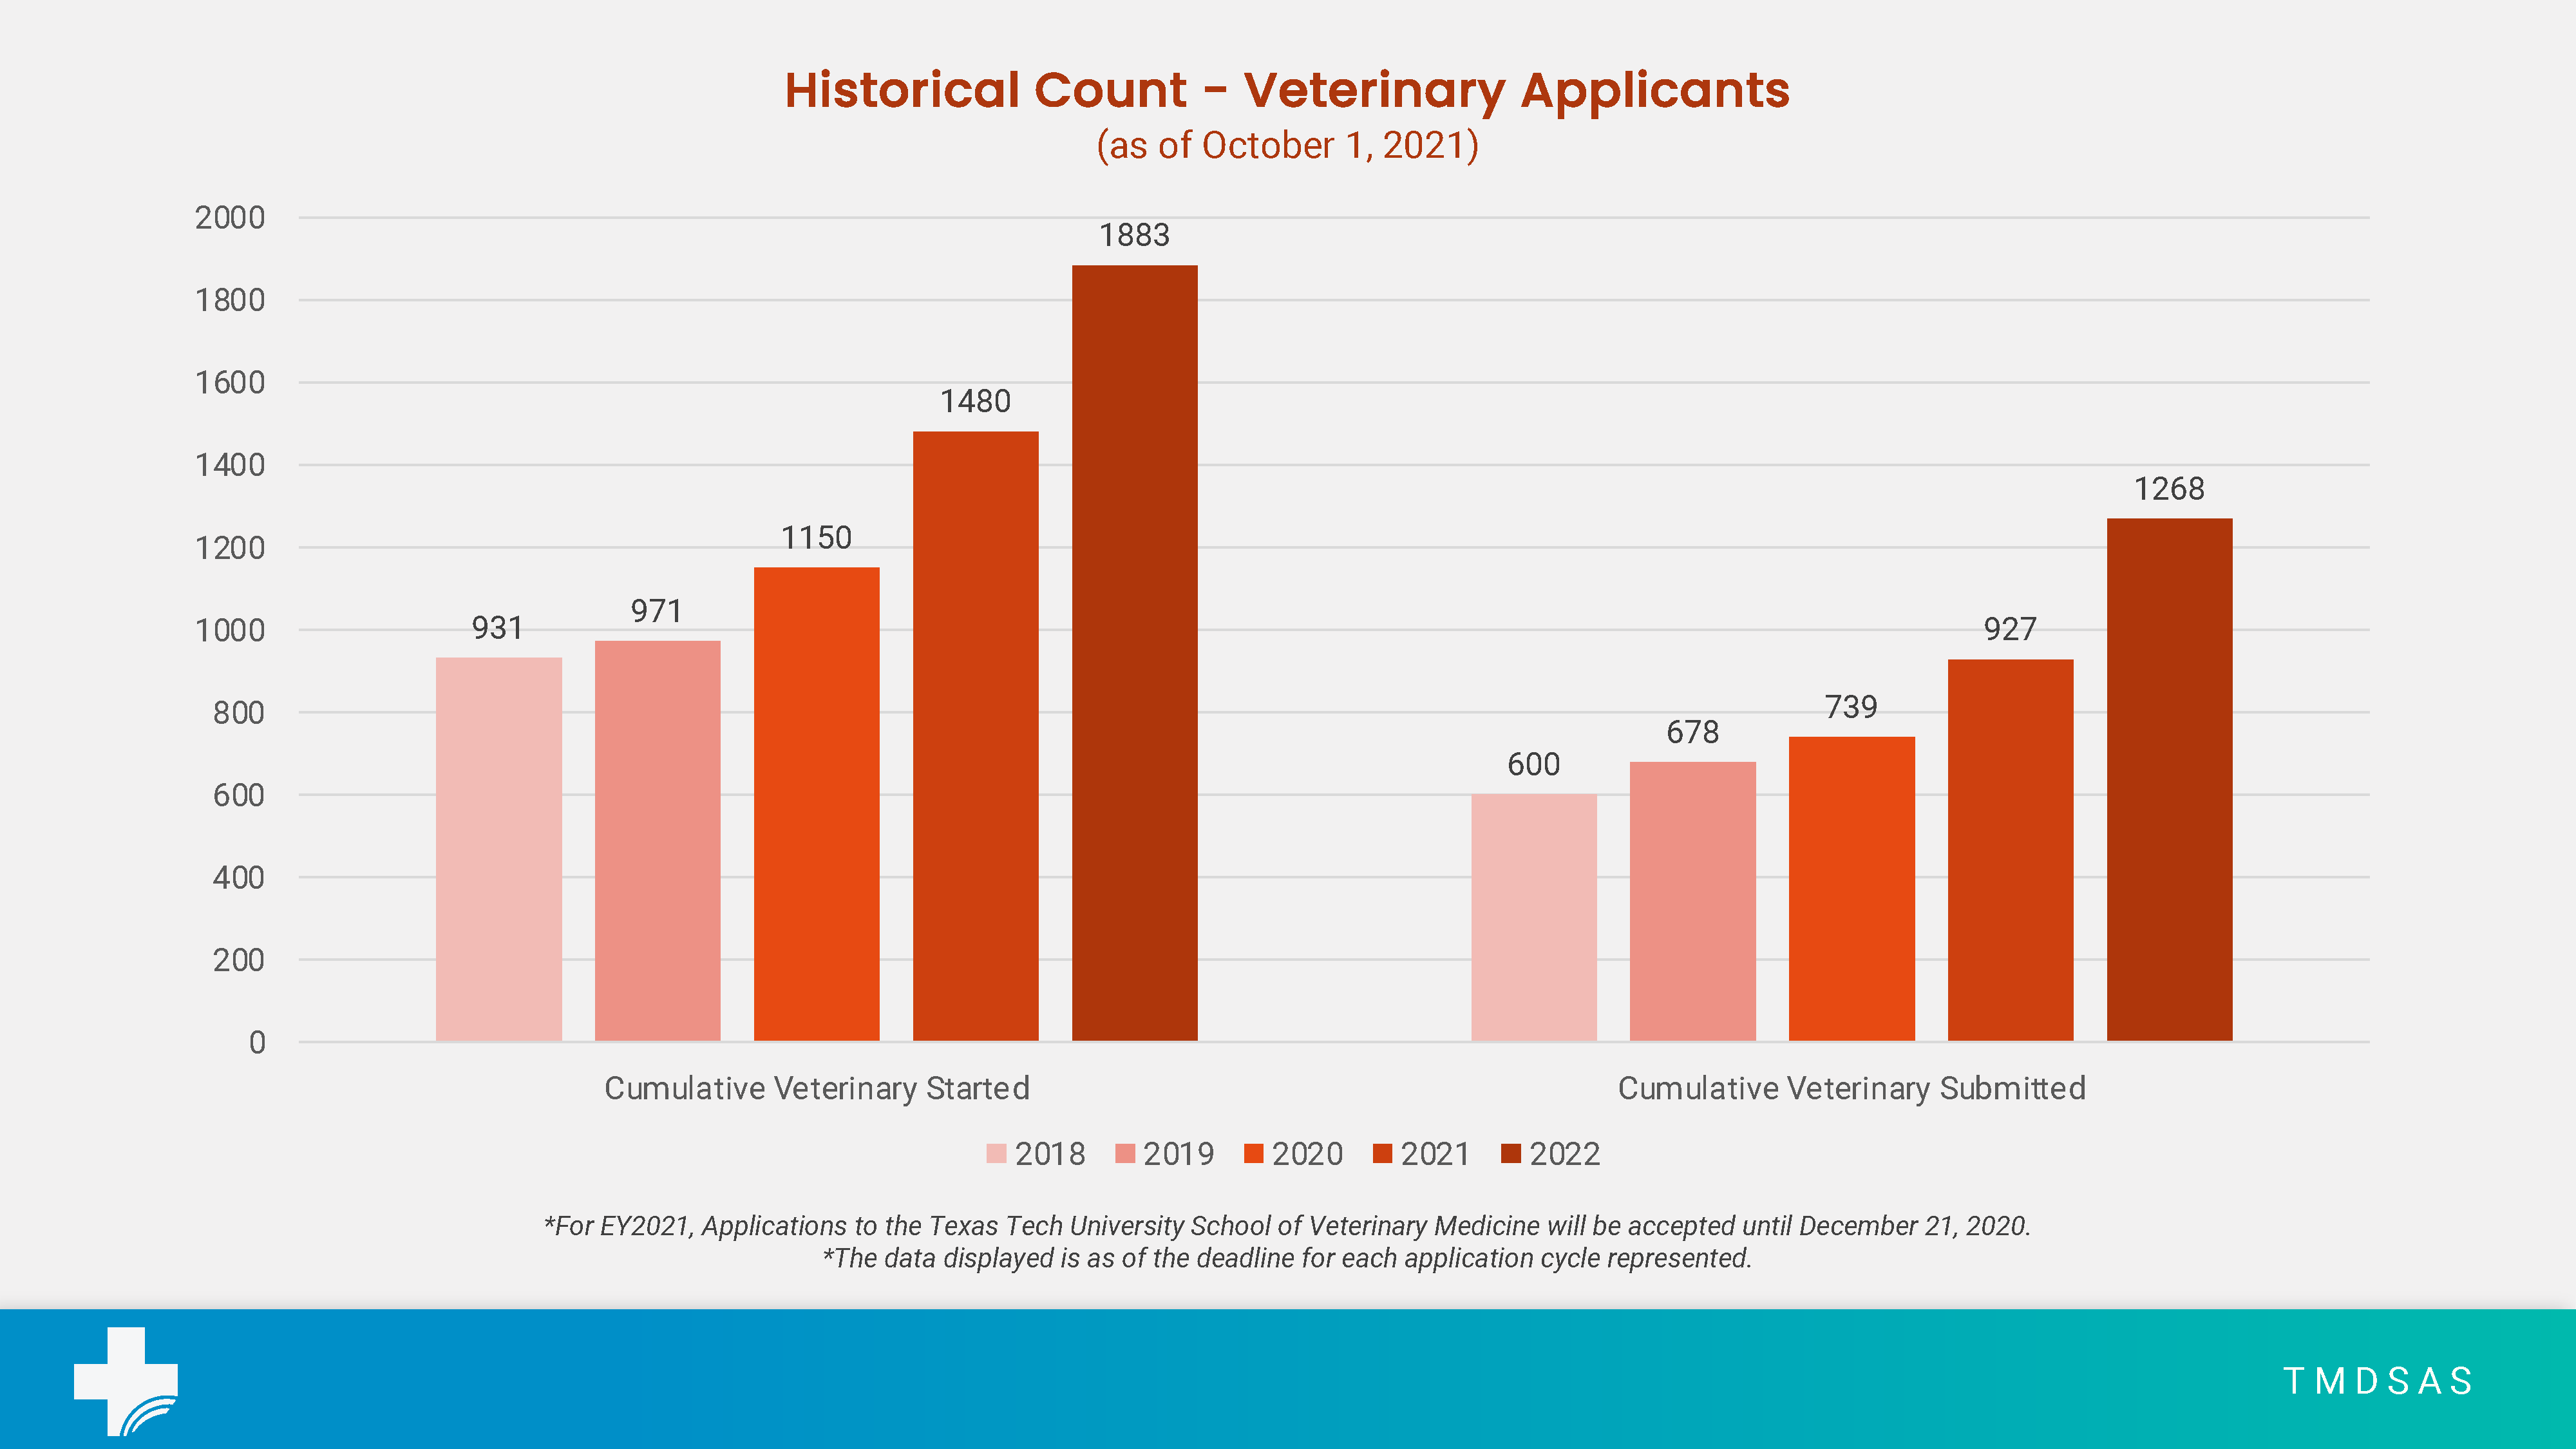 Total Veterinary Application Numbers for October 2021